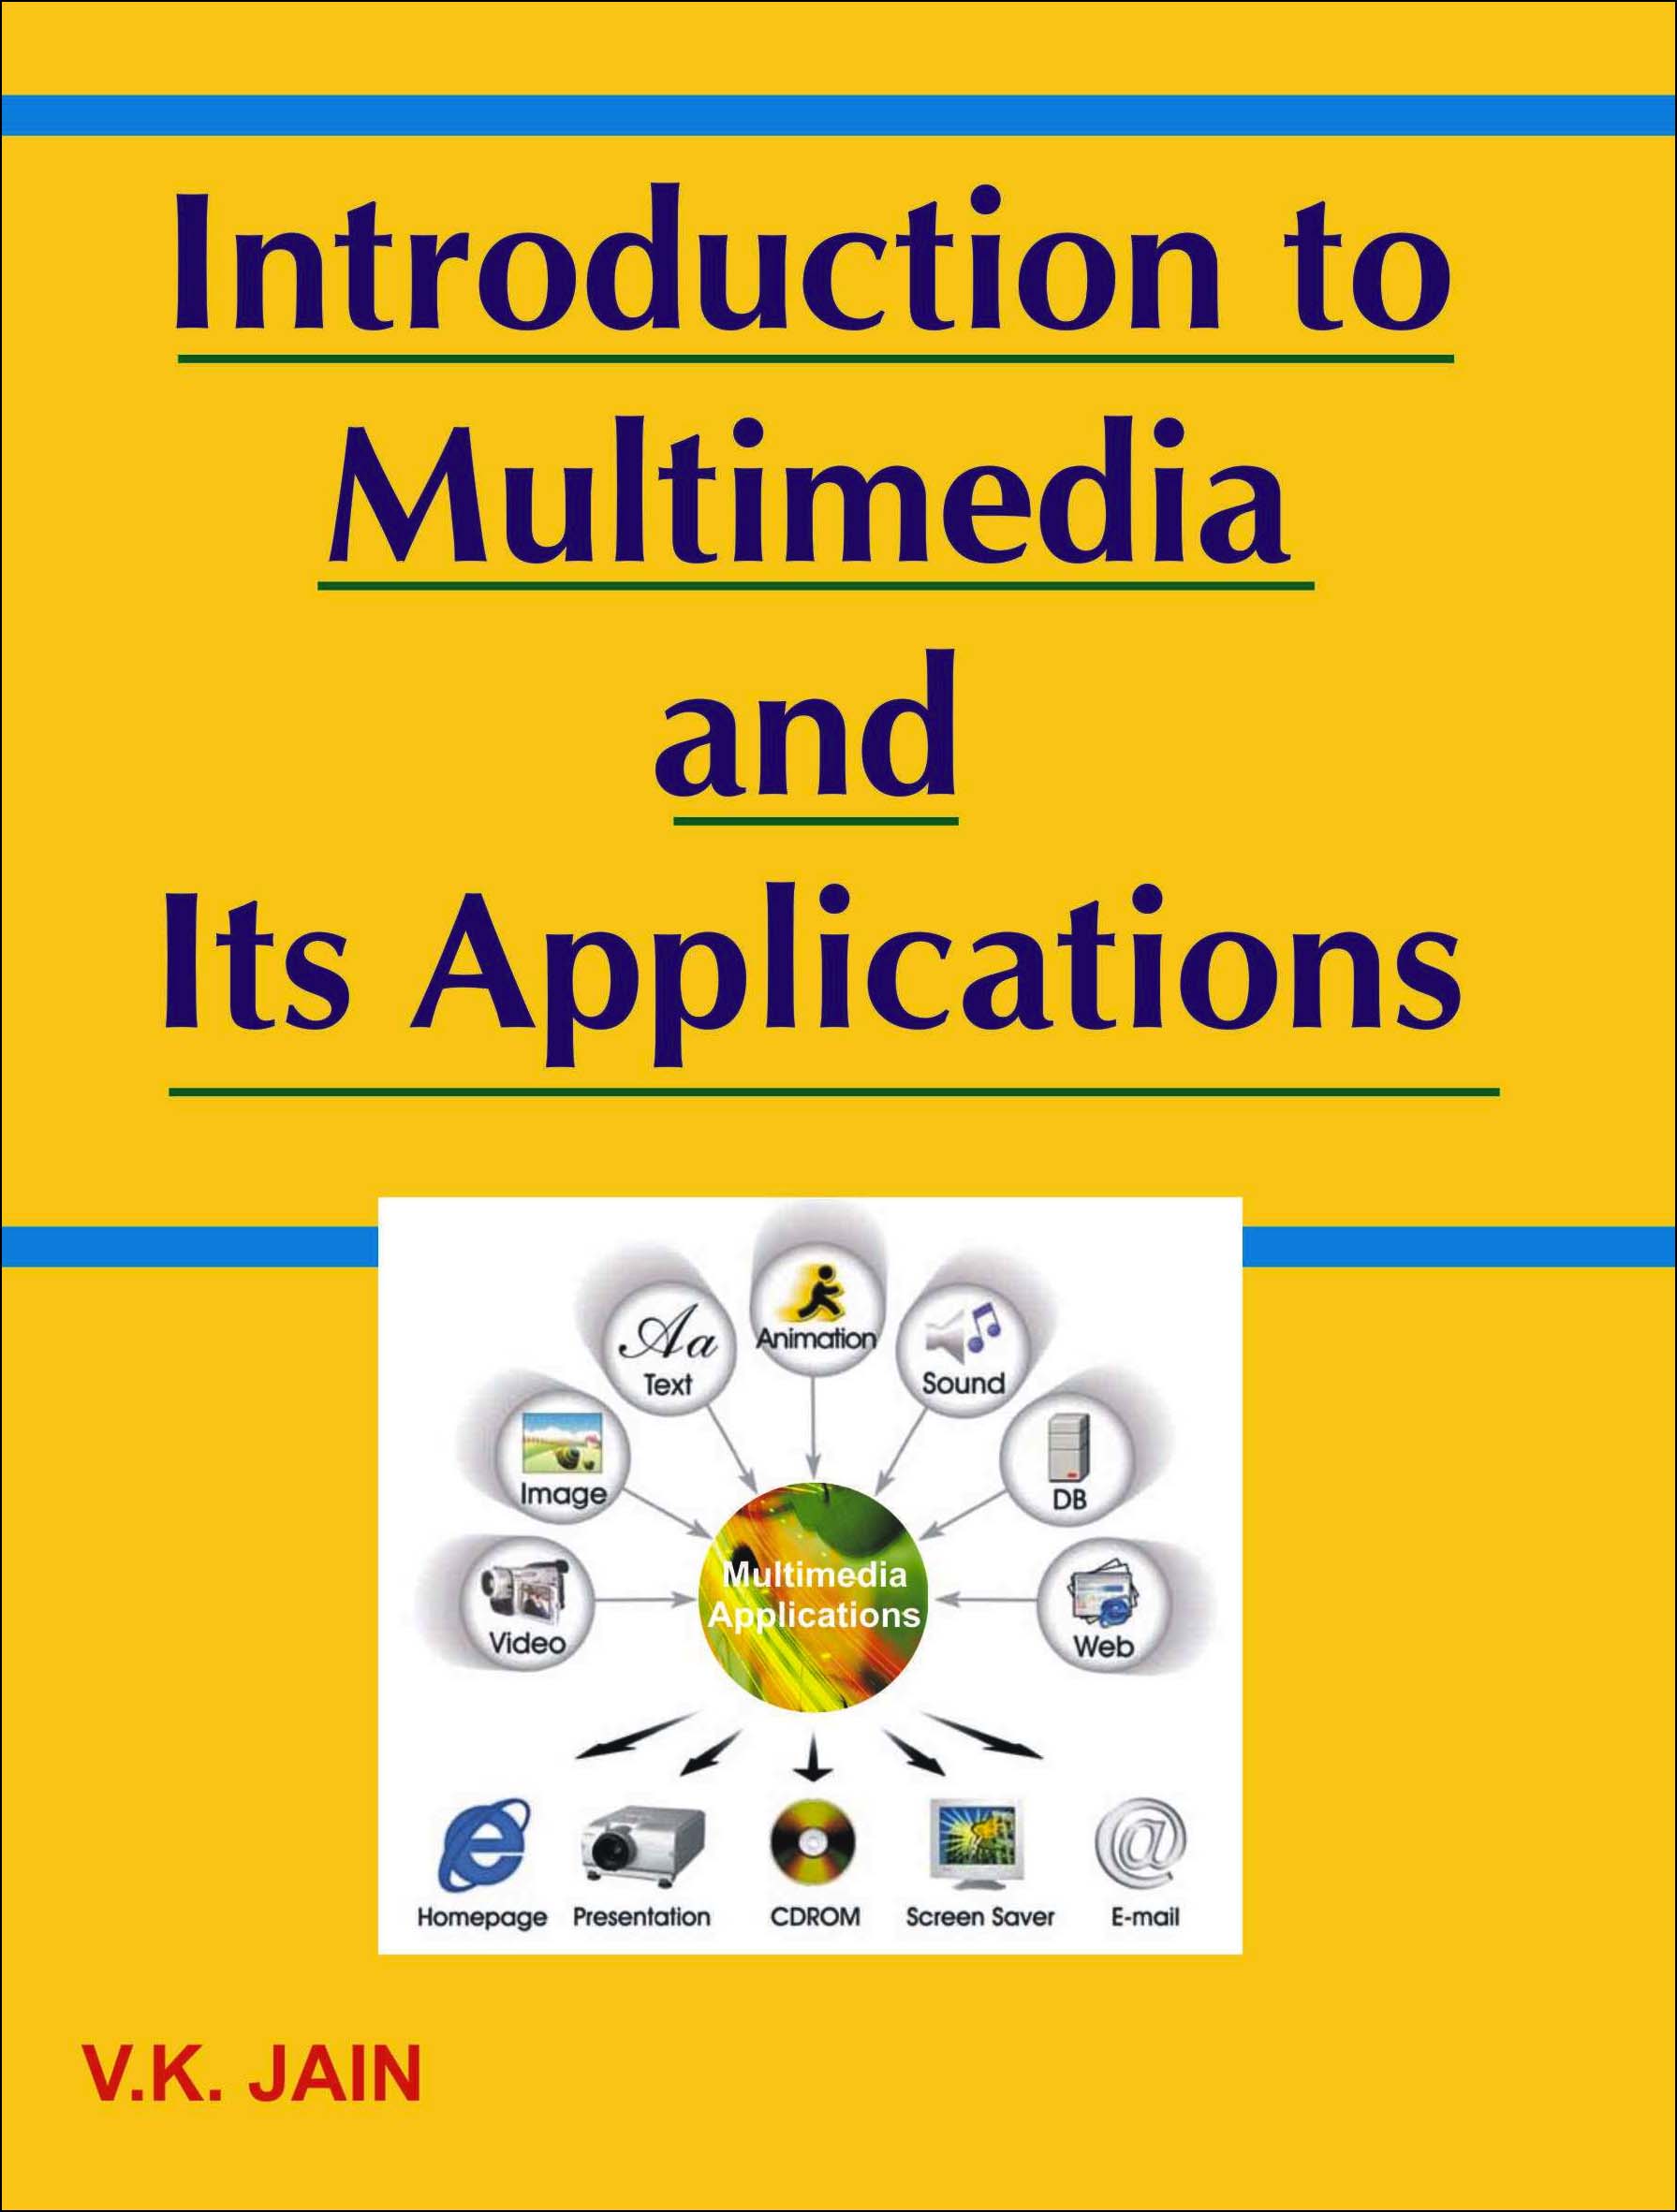 Introduction to Multimedia and Its Applications